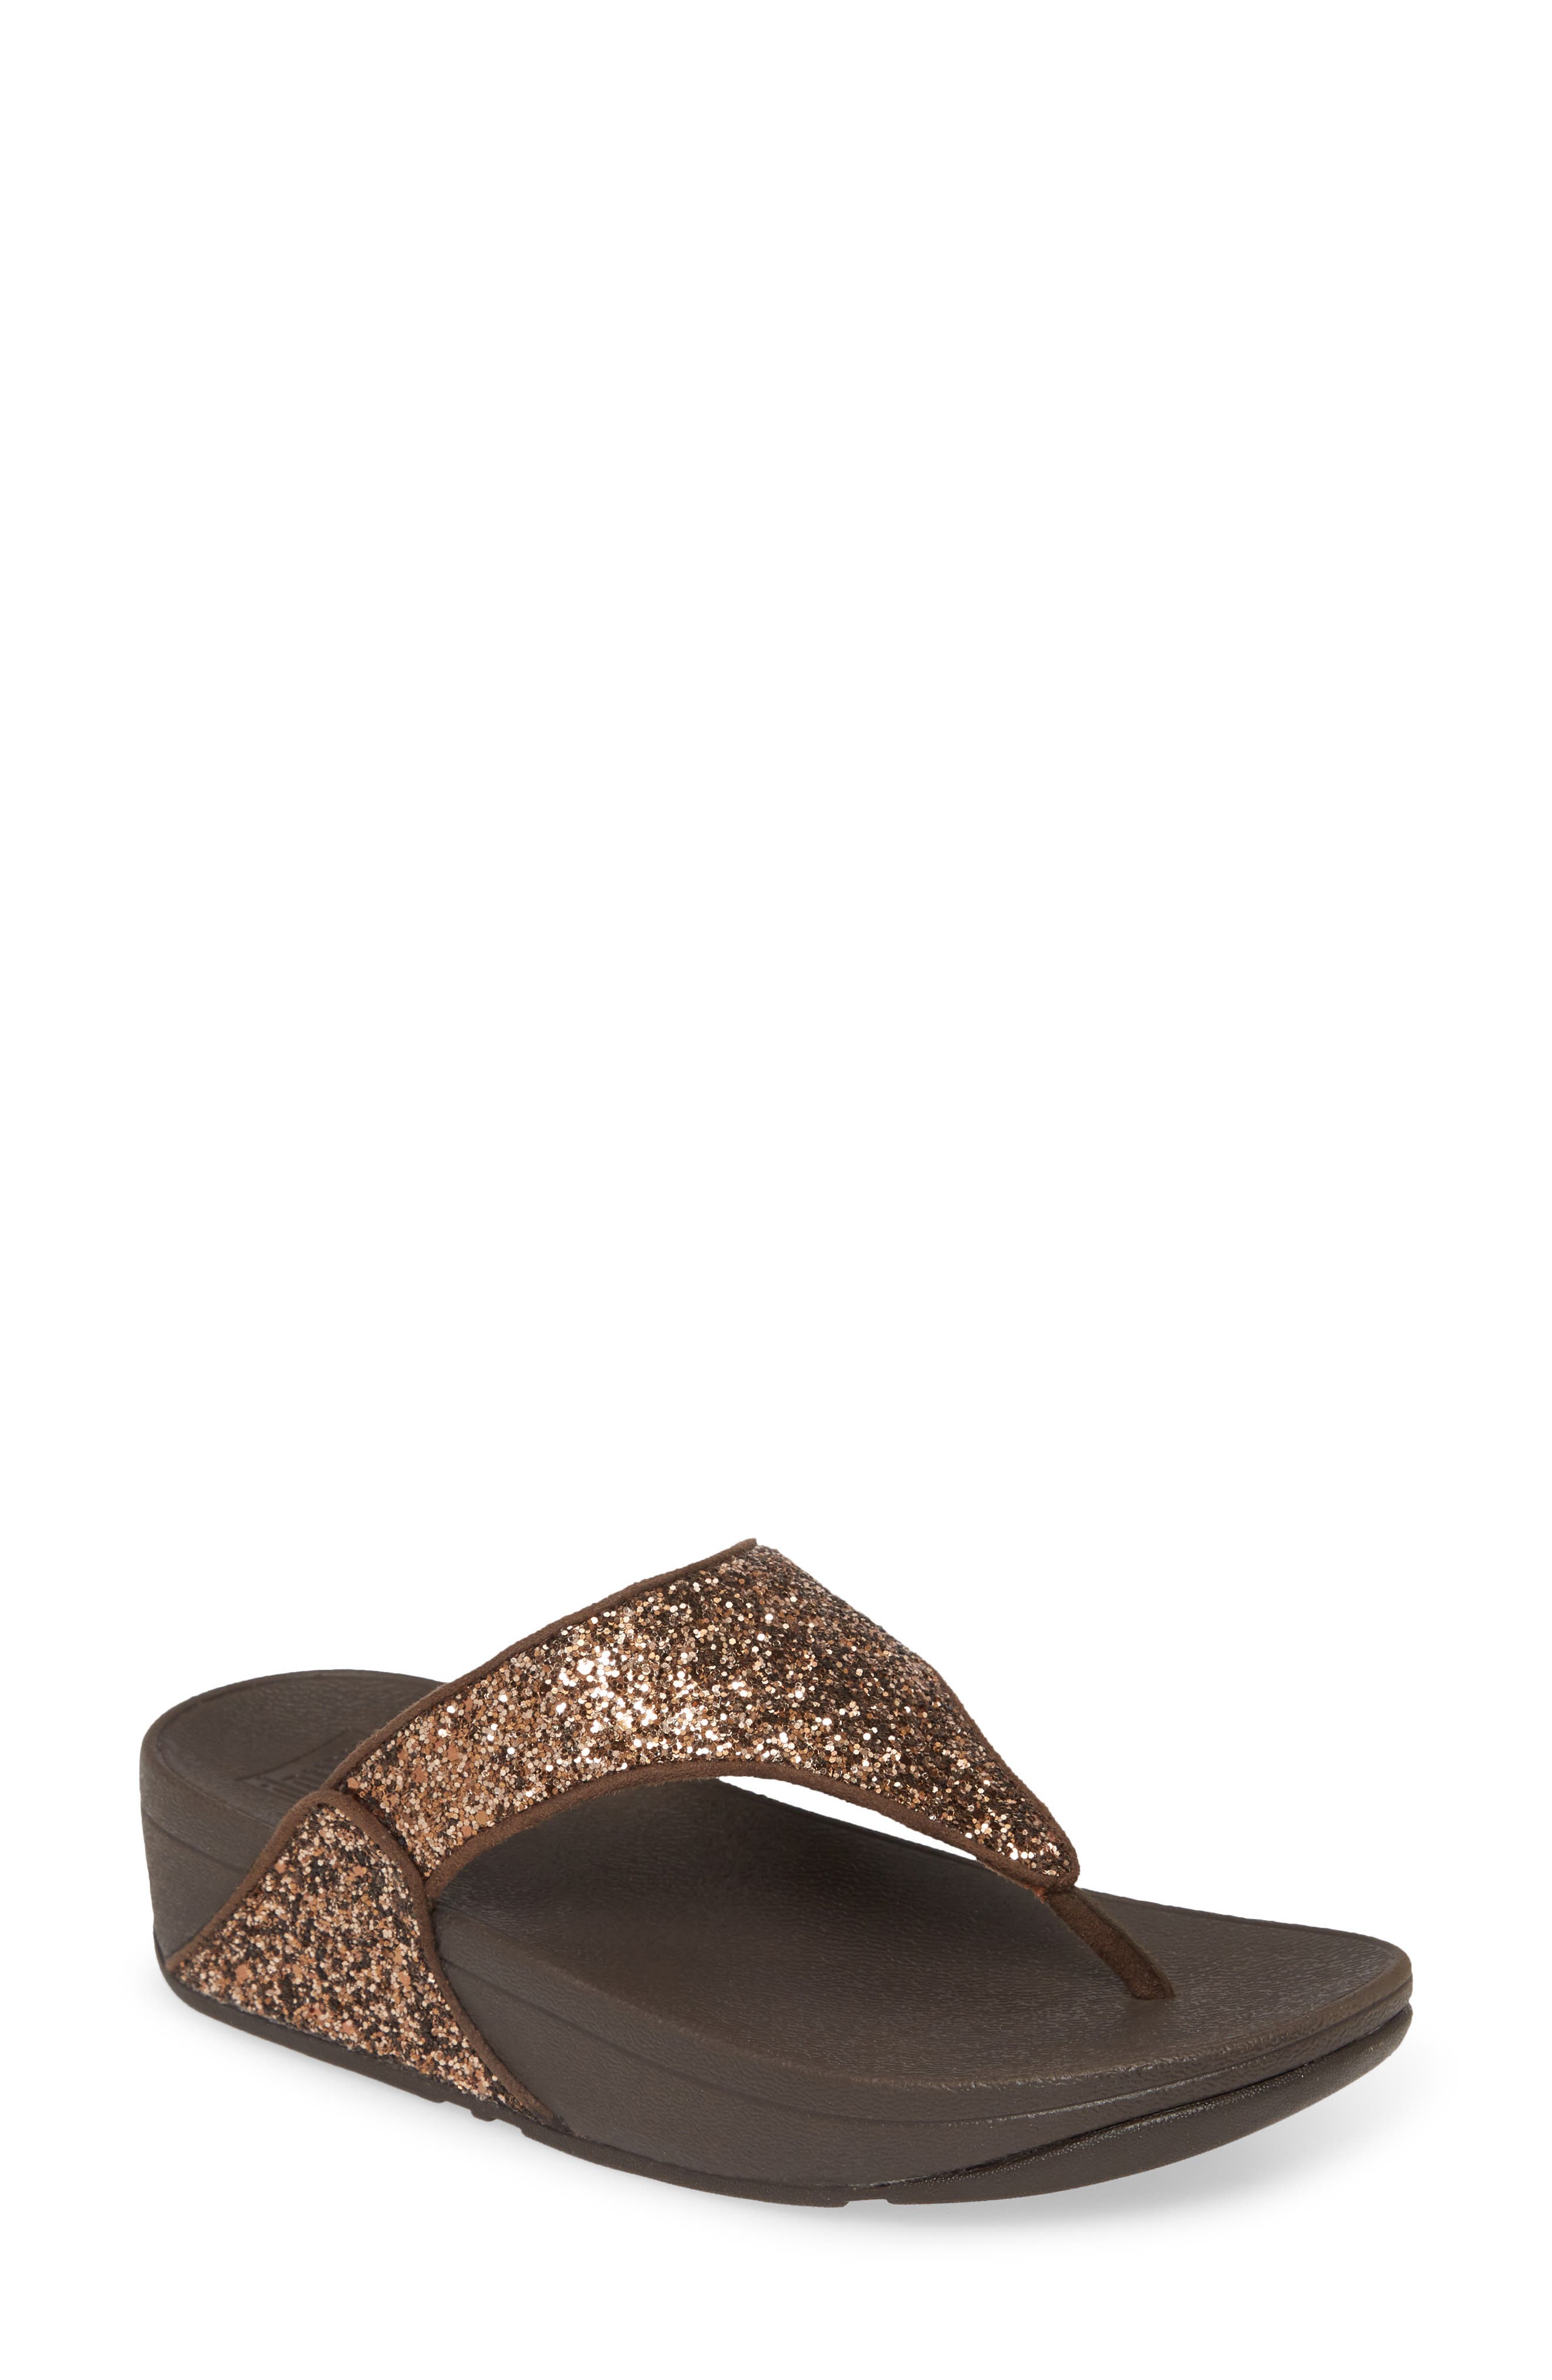 FitFlop Sale \u0026 Clearance | Nordstrom